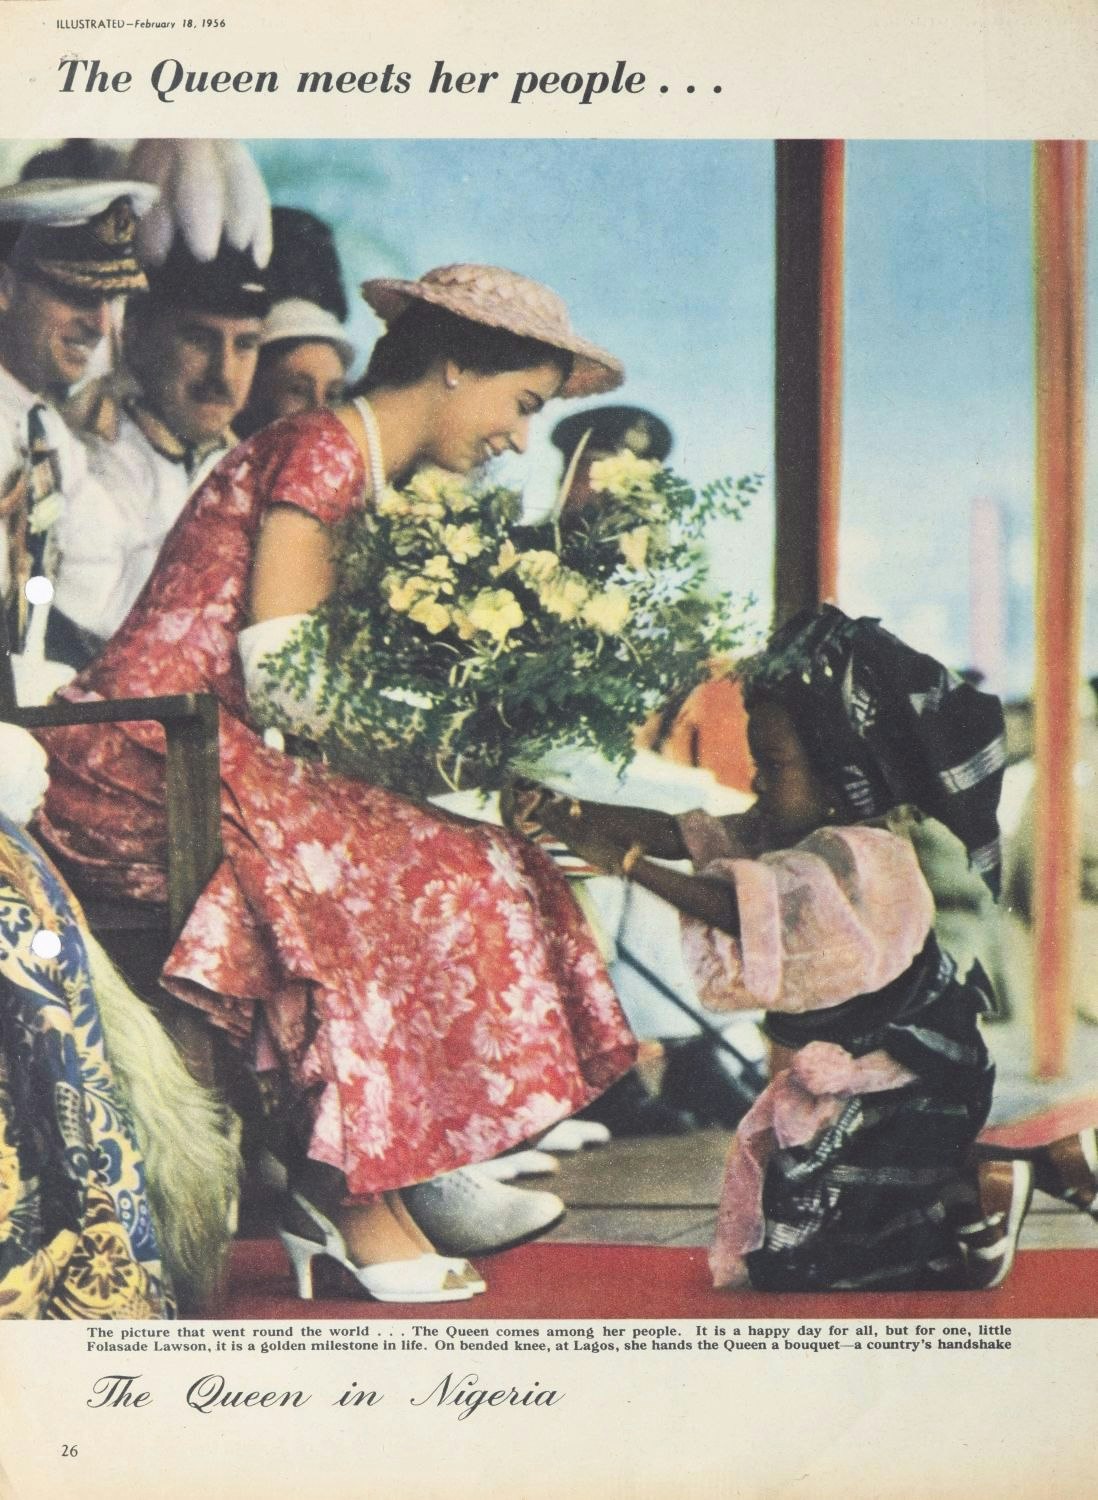 A seated woman in a pink dress and a hat is given a bunch of flowers by a young child in Niverian dreww